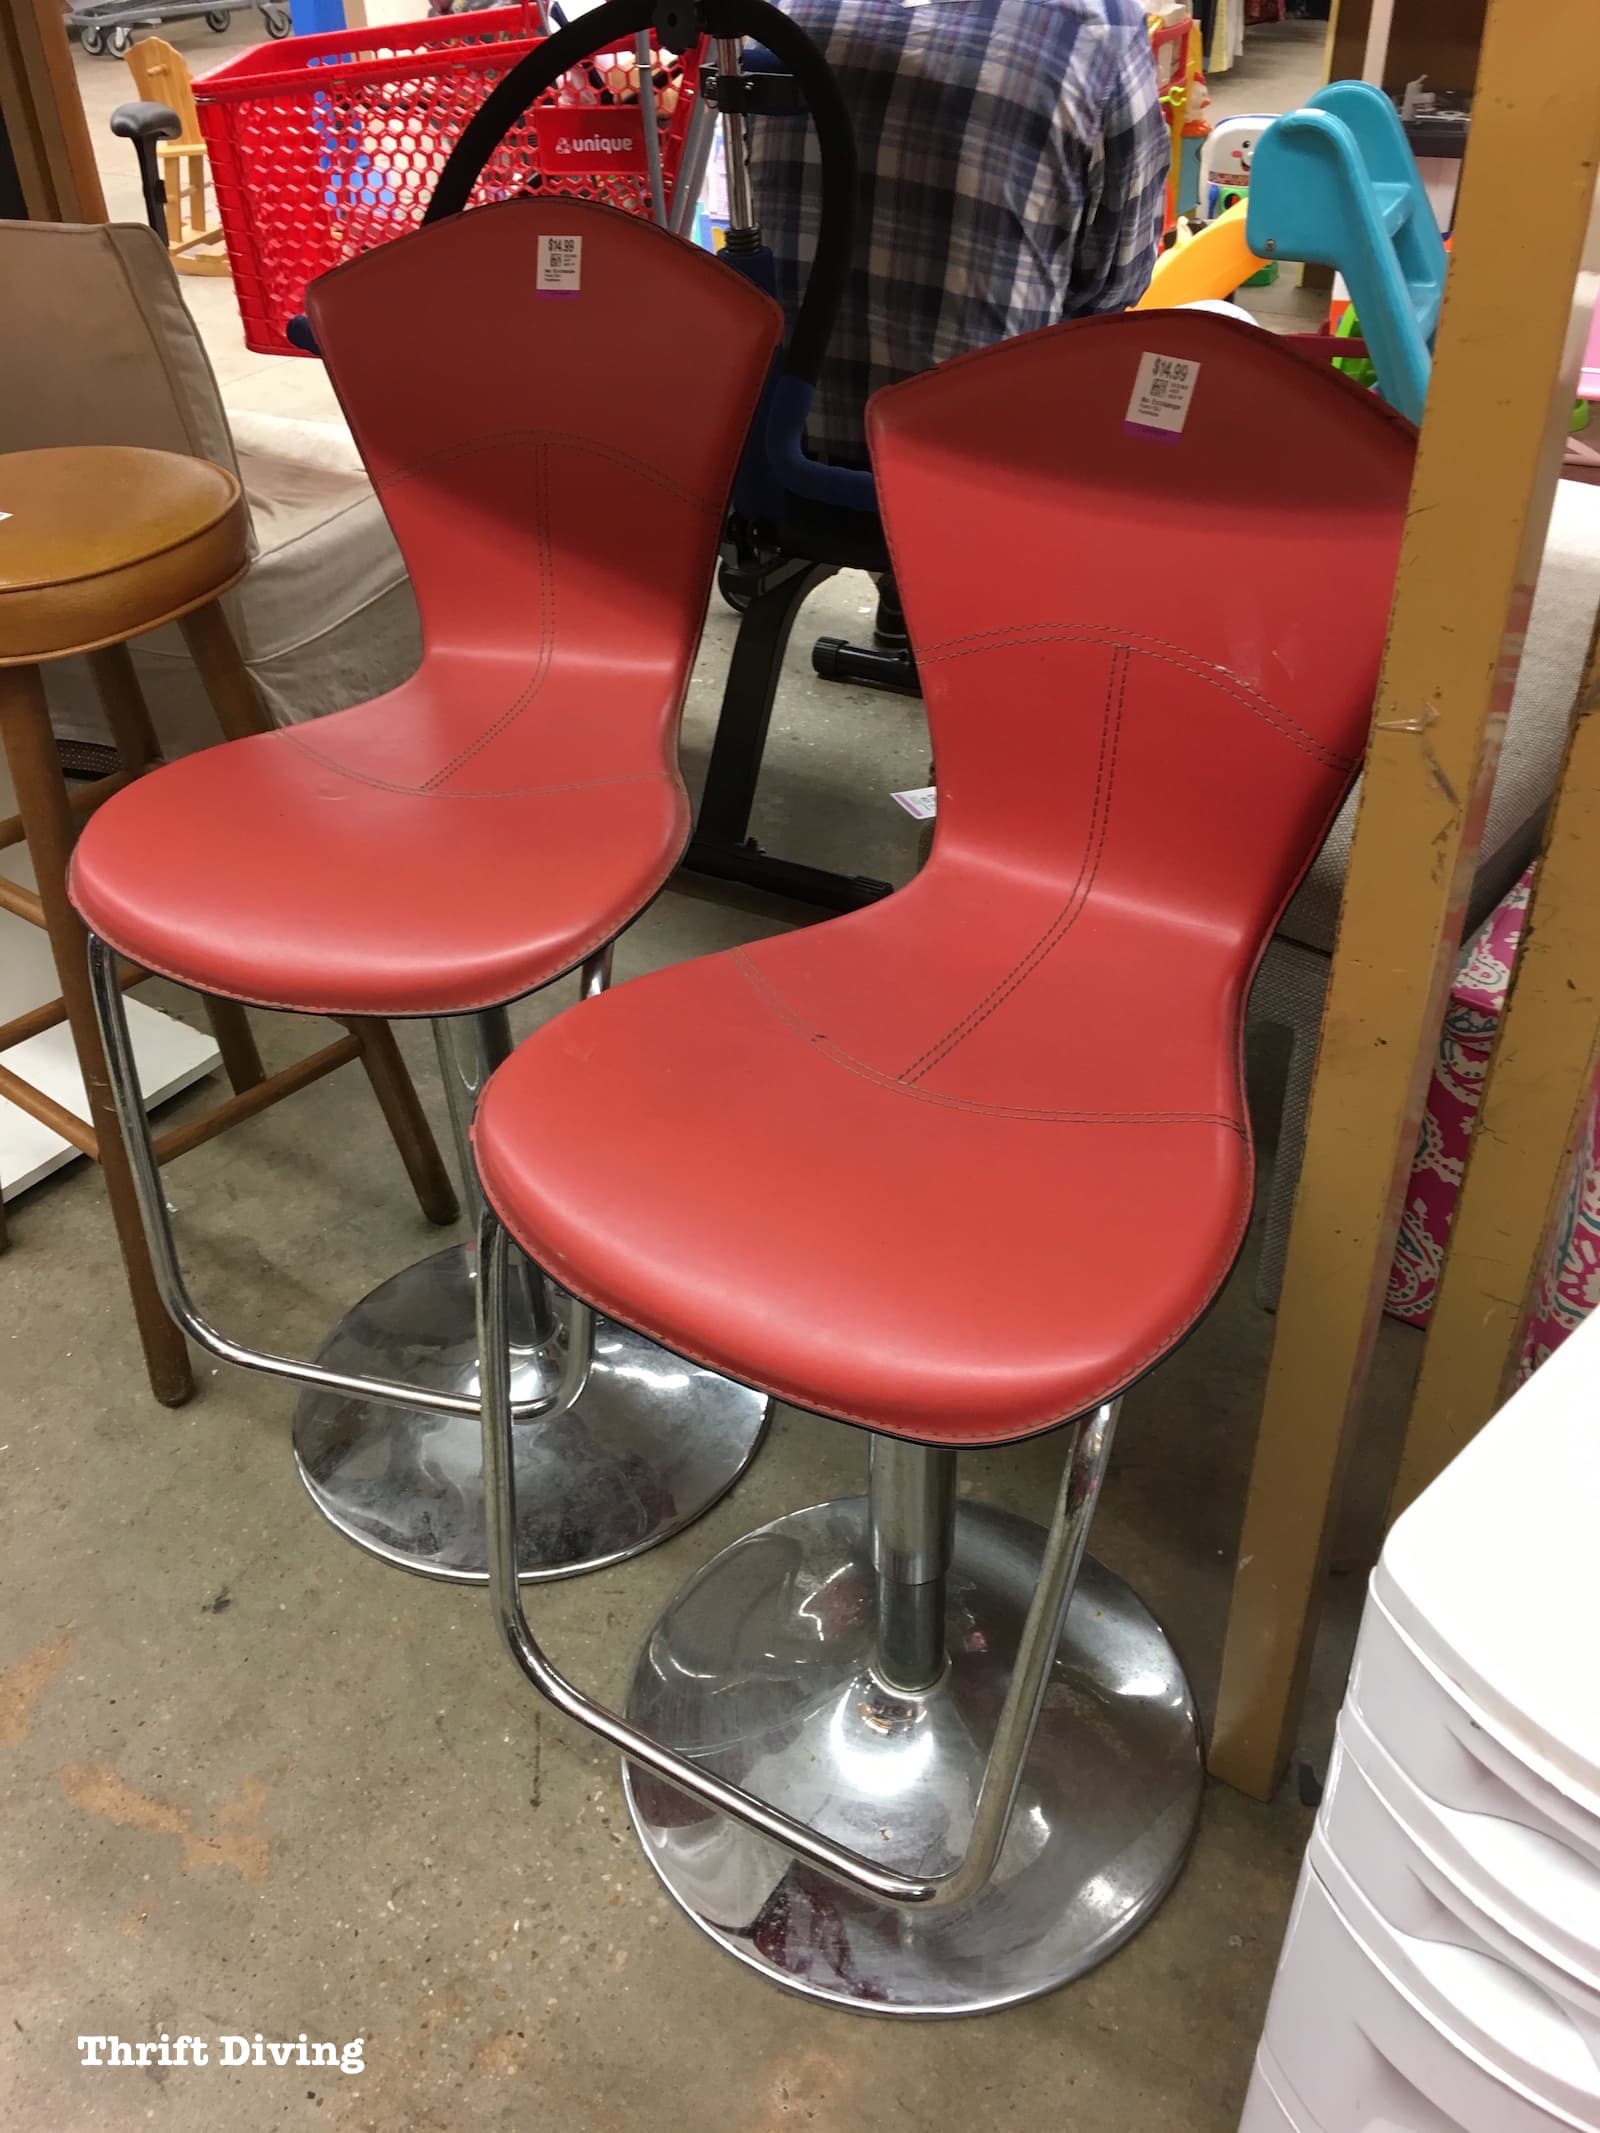 How to Shop Thrift Stores - Leather stools - Thrift Diving